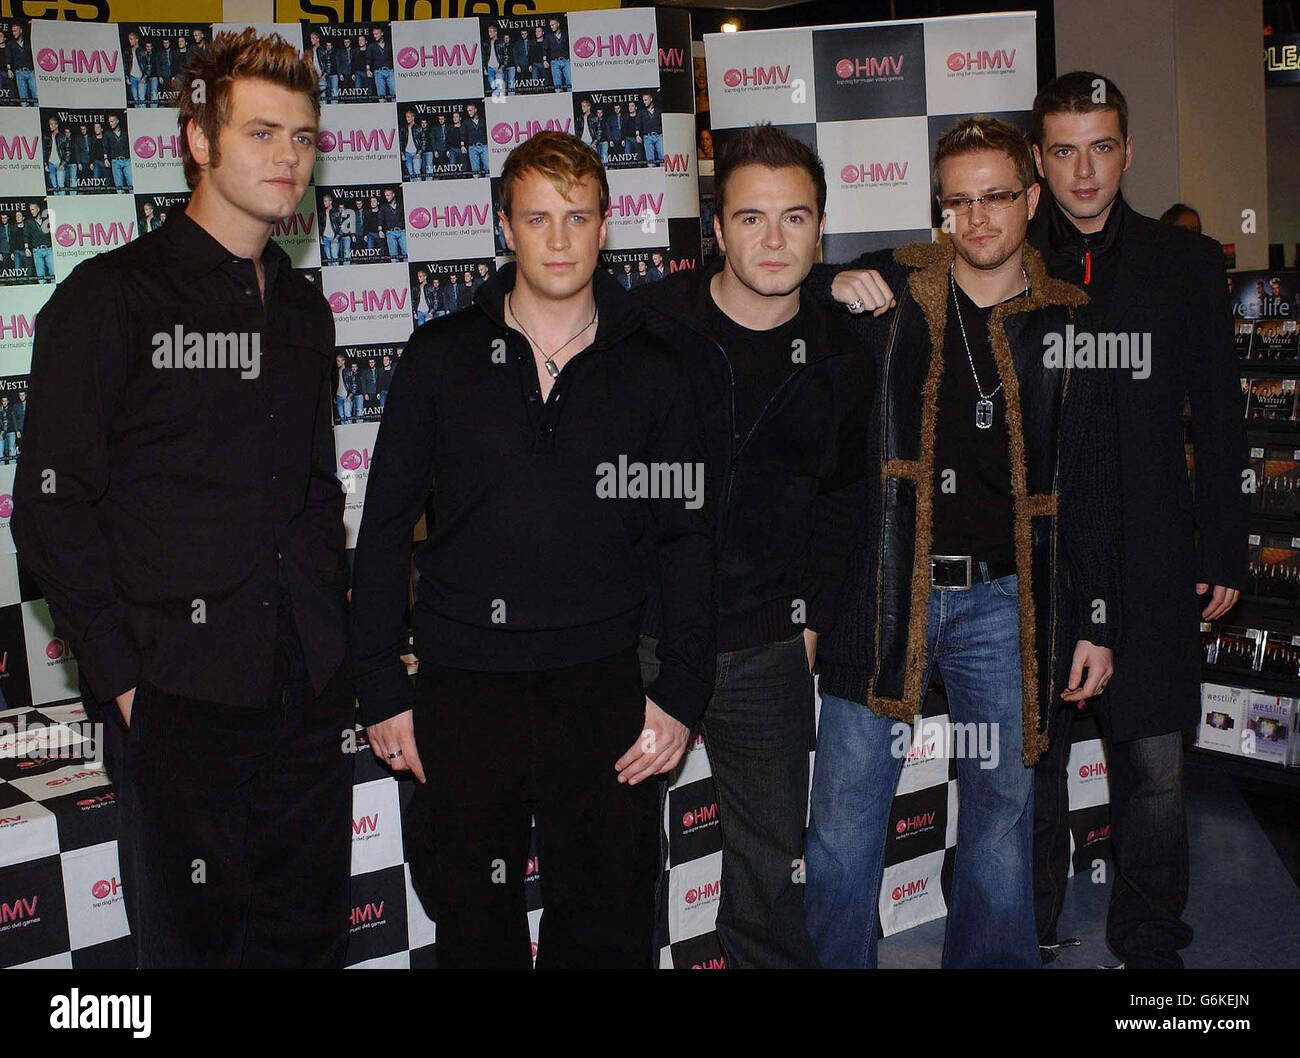 Boyband Westlife during a photocall and record signing to launch their new single 'Mandy', which is released today at HMV Trocadero, Piccadilly Circus, central London. Mandy was originally a hit for Barry Manilow back in 1975. Stock Photo